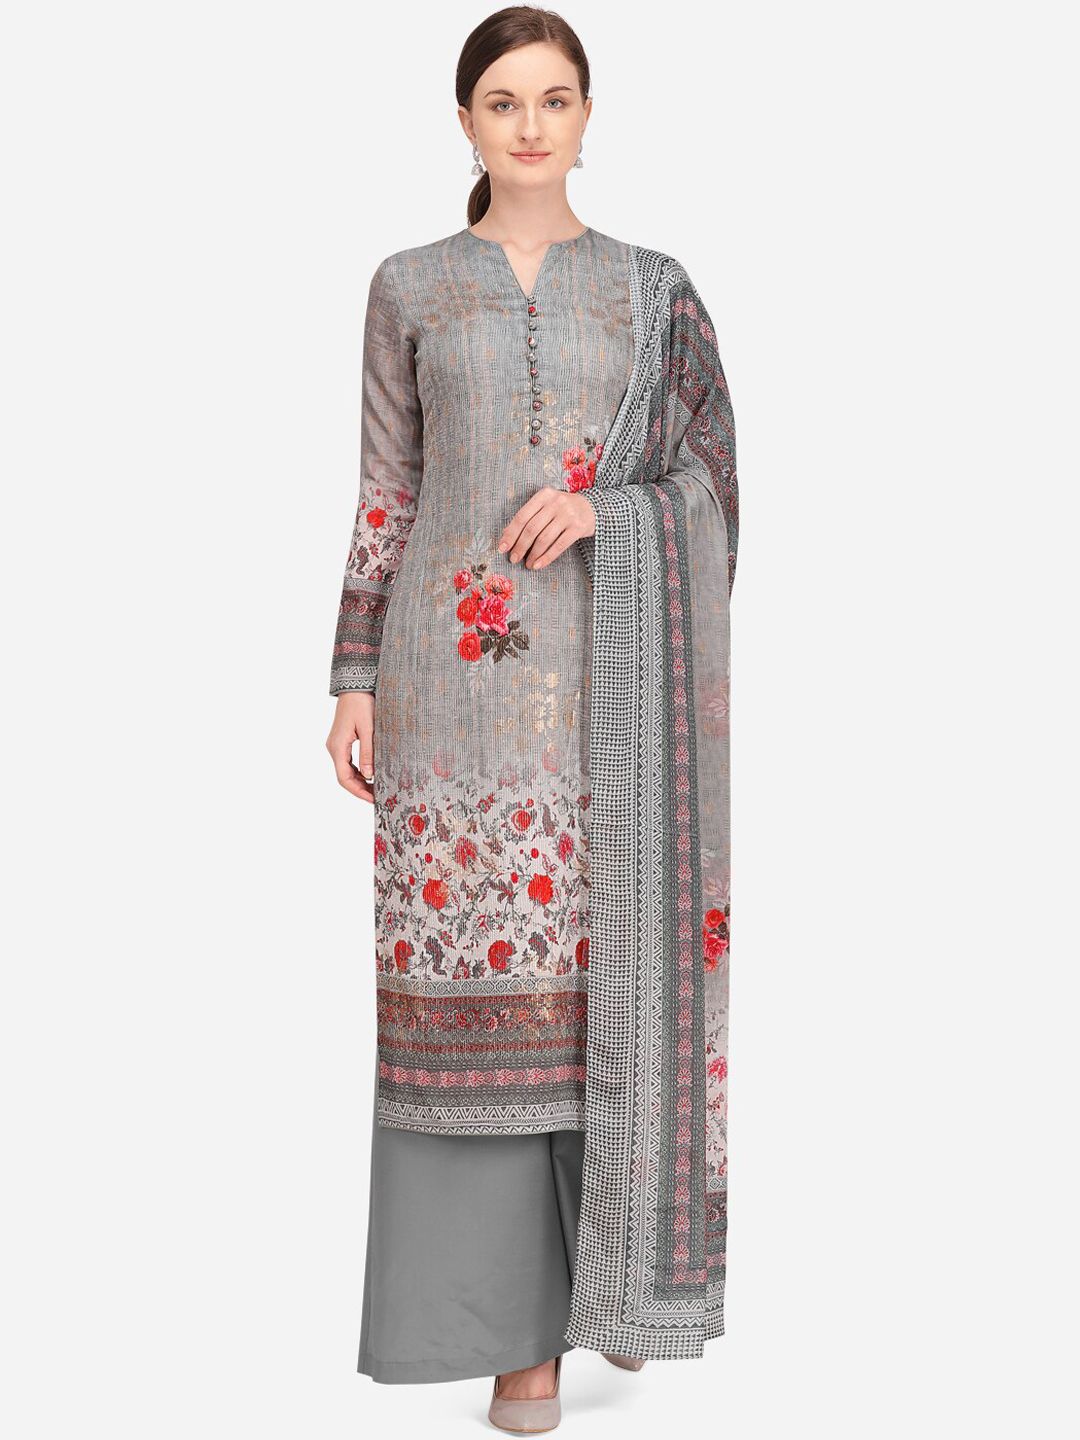 Stylee LIFESTYLE Women Grey & Black Printed Unstitched Dress Material Price in India